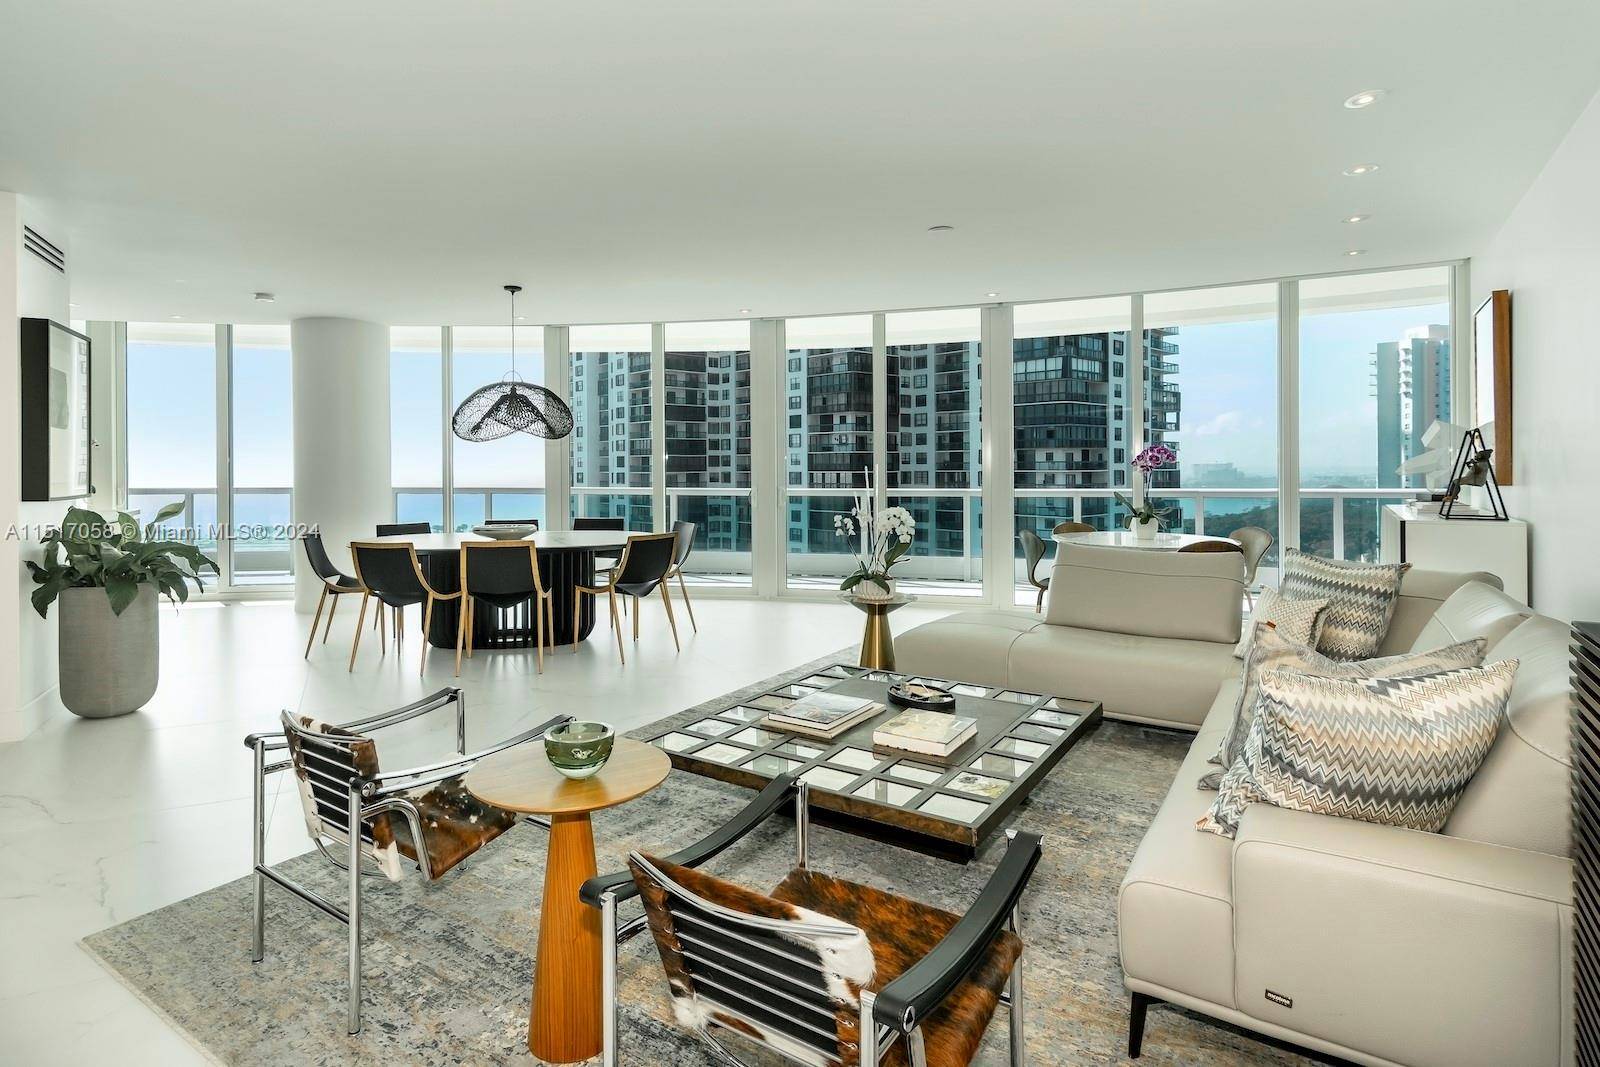 Enjoy the experience of living in Bristol Tower the elegant building with only 144 apartments in the most desirable area on Brickell Av.